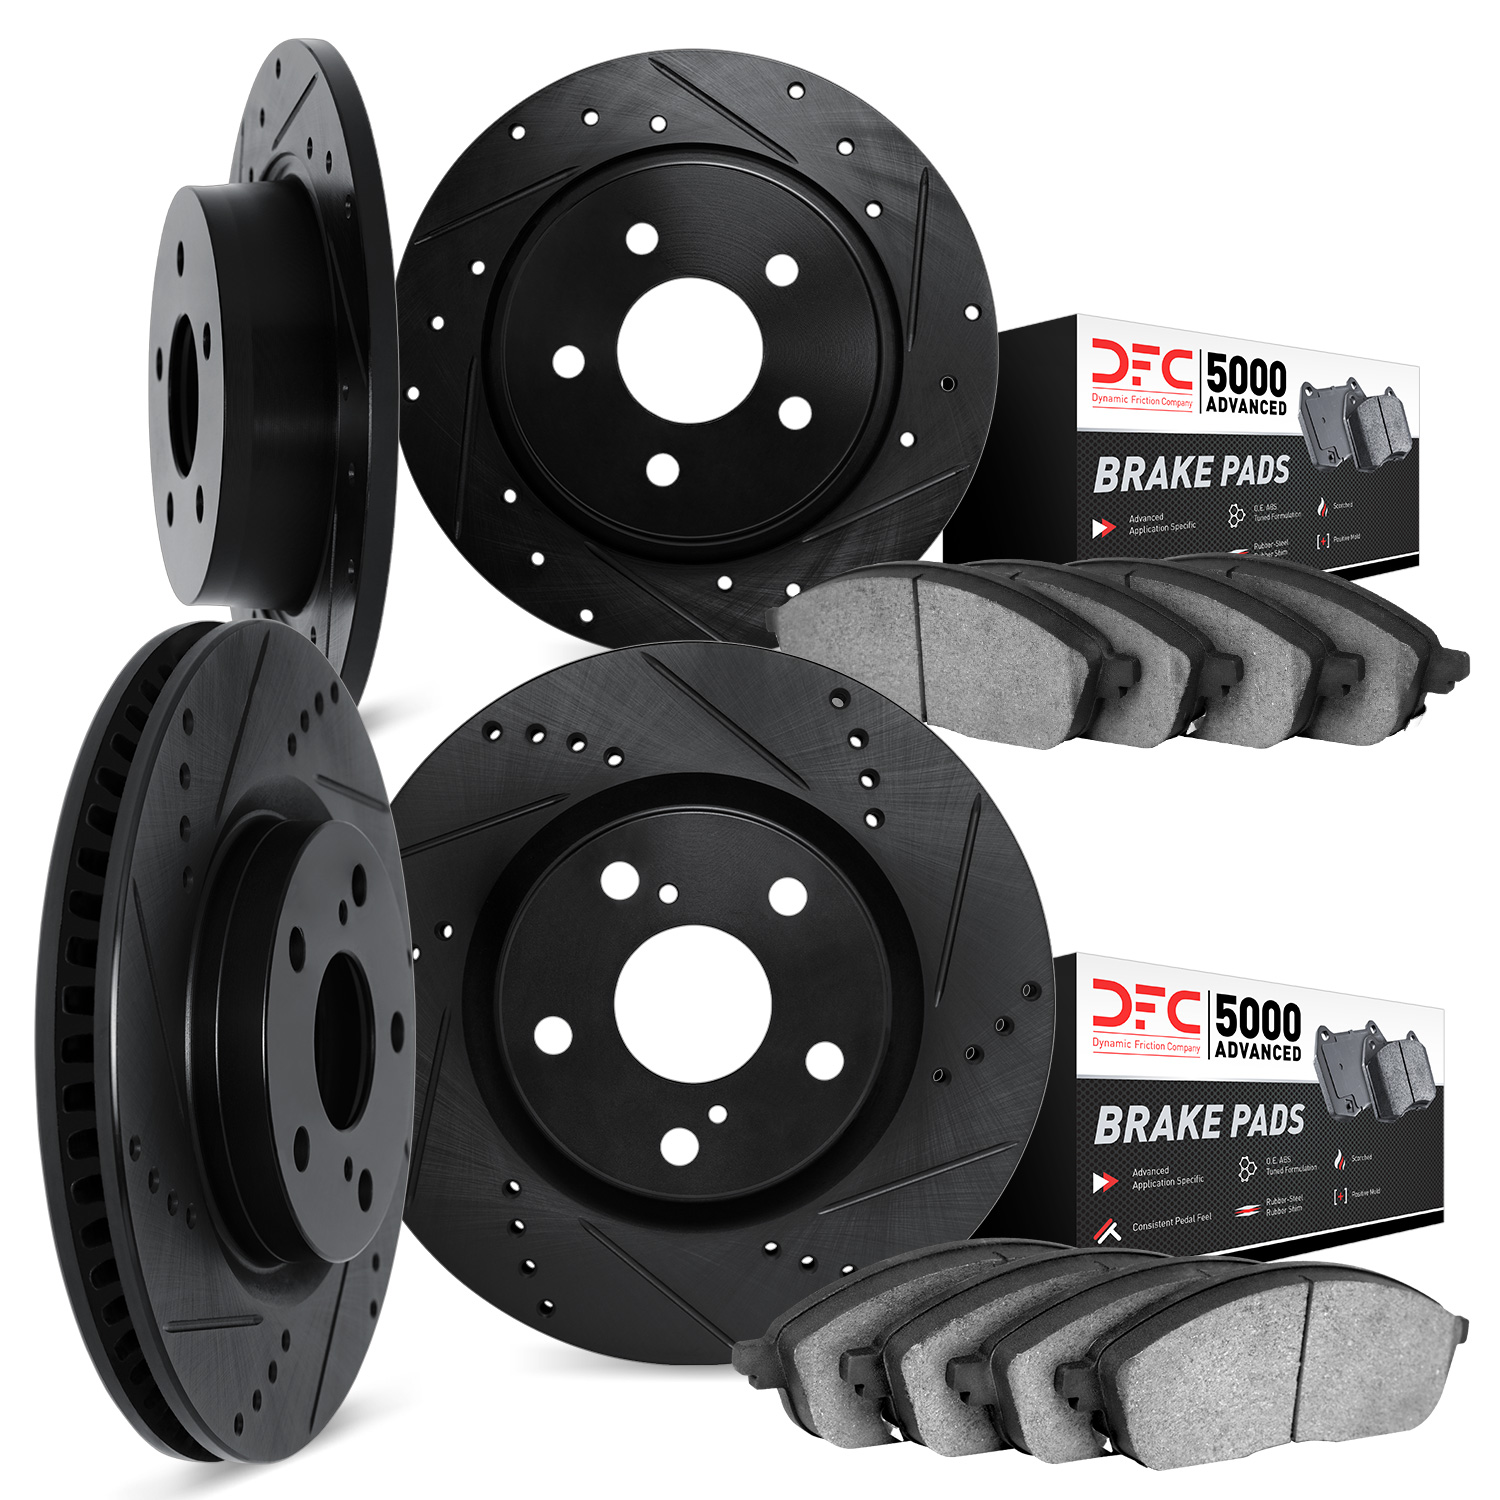 8504-11005 Drilled/Slotted Brake Rotors w/5000 Advanced Brake Pads Kit [Black], 1994-2002 Land Rover, Position: Front and Rear